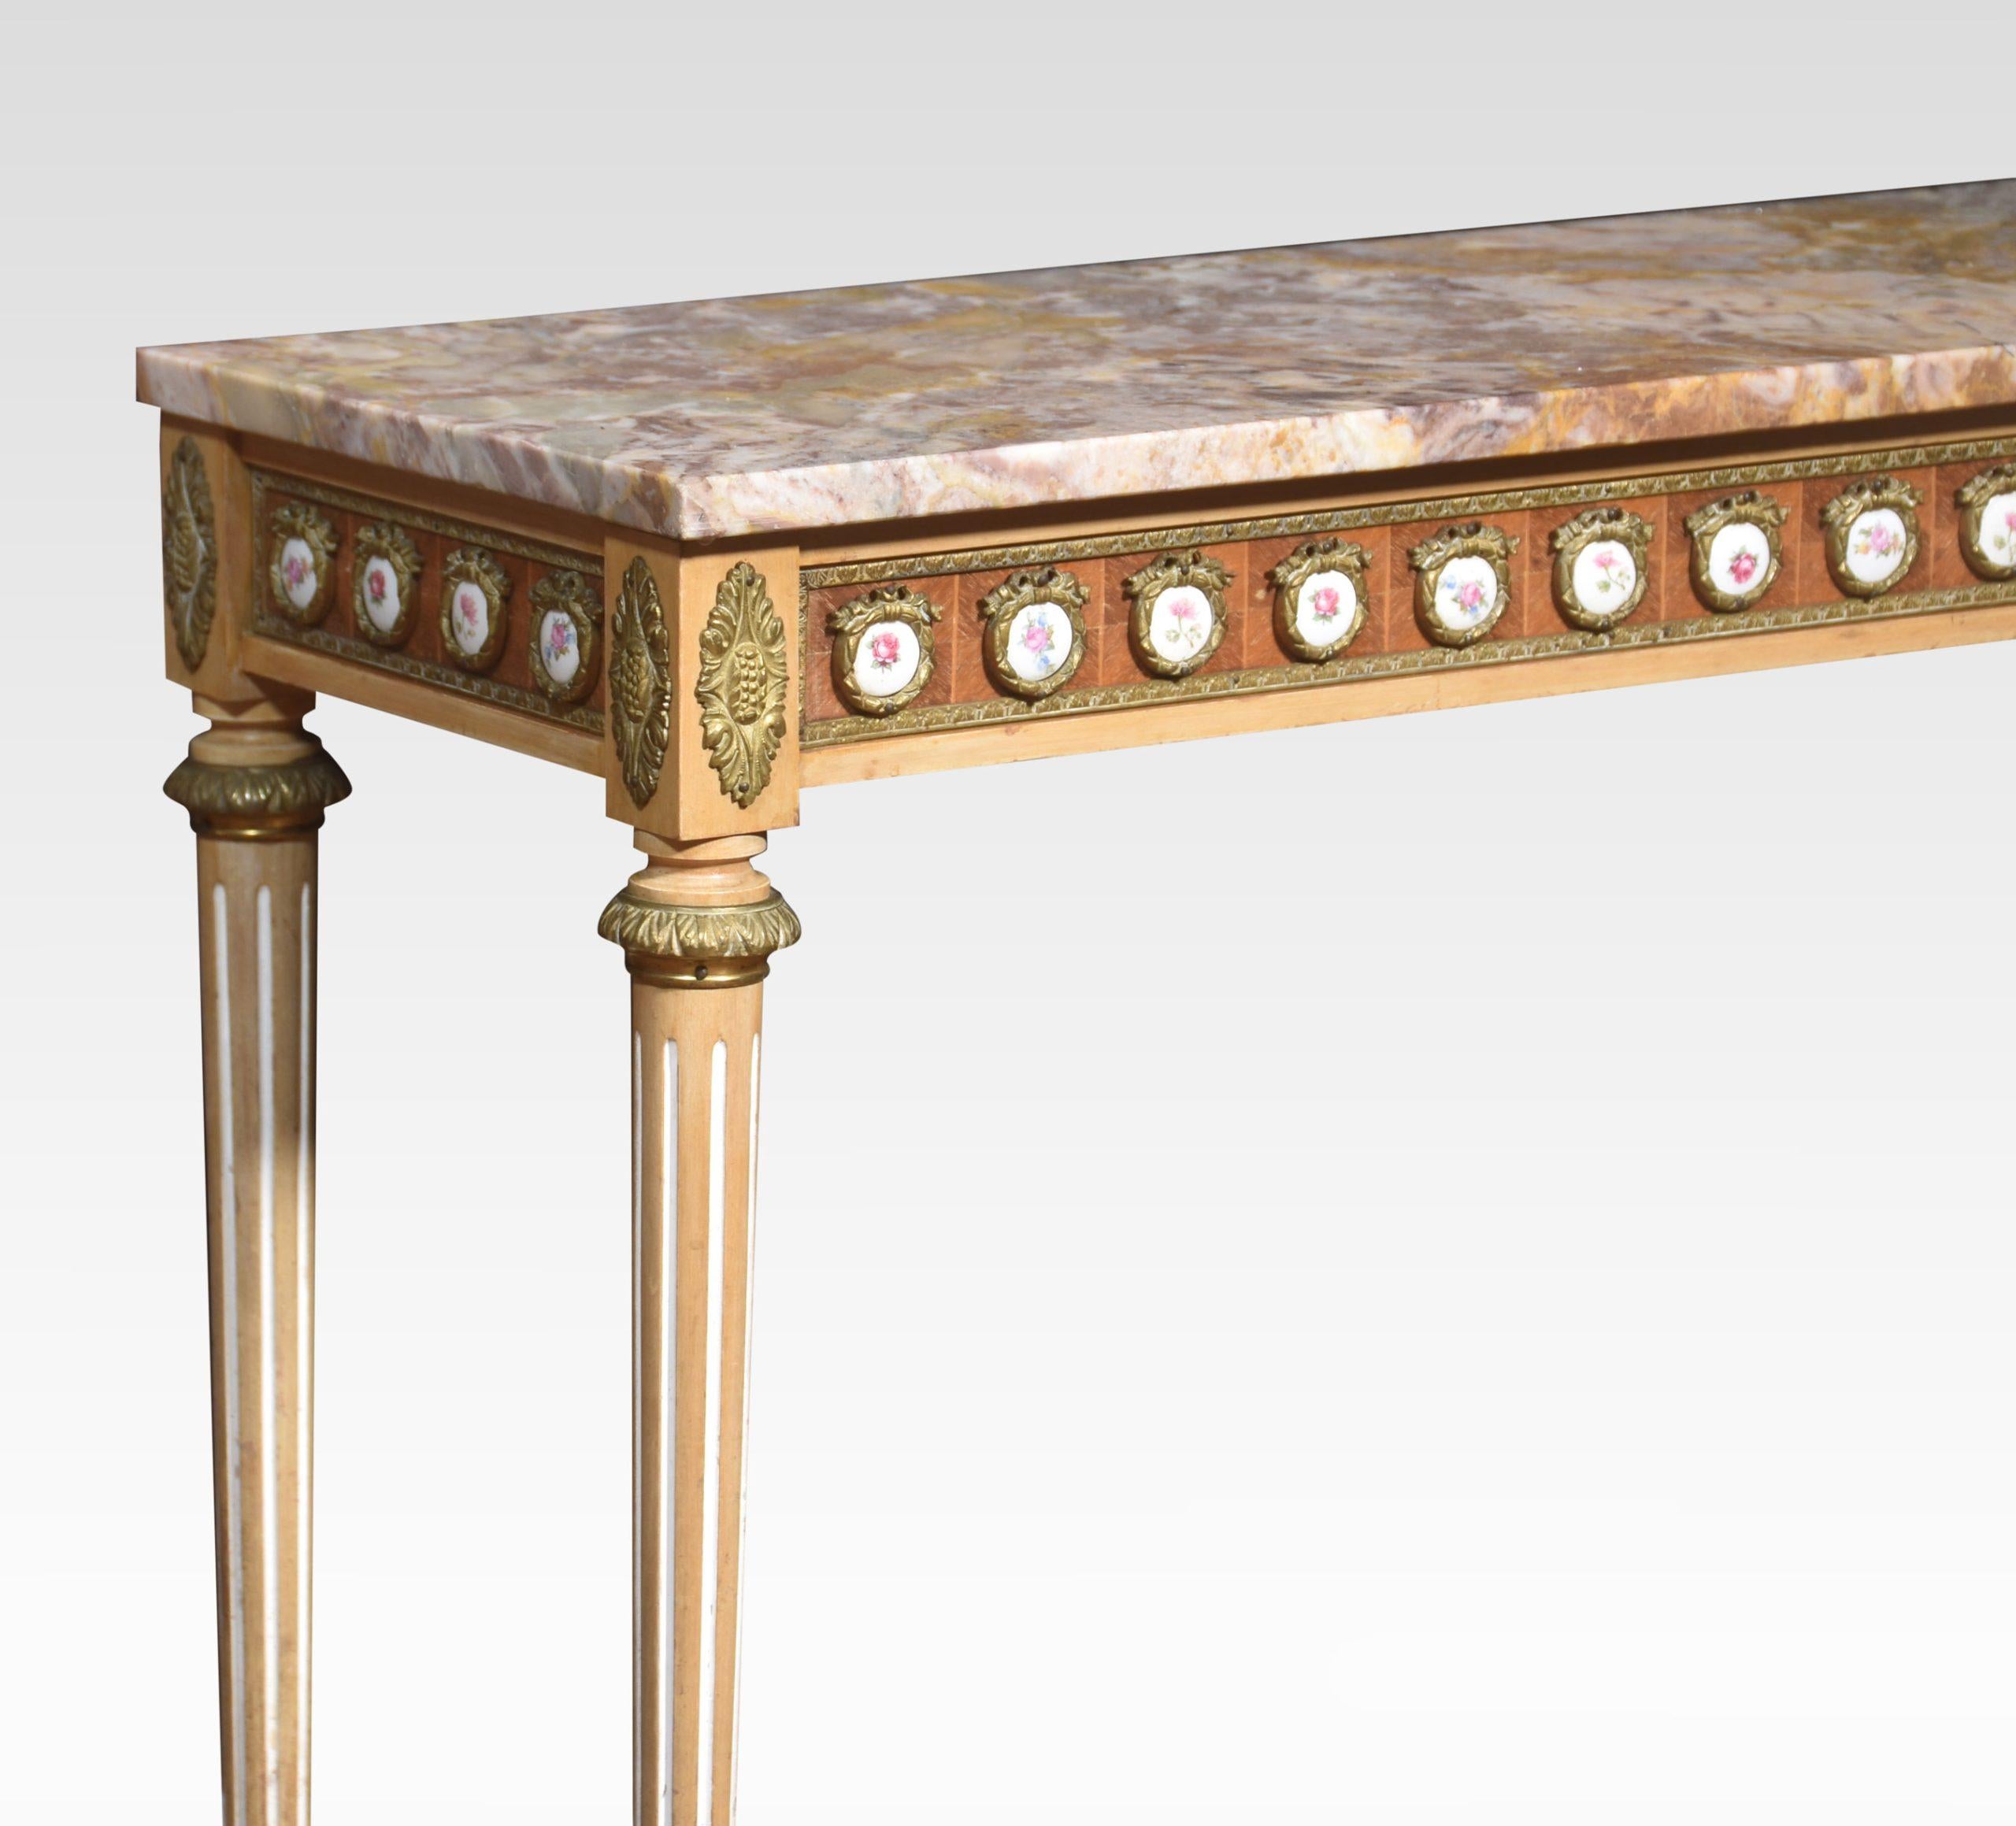 Louis XVI revival console table by H & L Epstein, the rectangular well figured marble top to the freeze having gilt metal mounts, and enamel plaques. Raised up on fluted tapering supports.
Dimensions
Height 31.5 Inches
Width 37 Inches
Depth 14 Inches